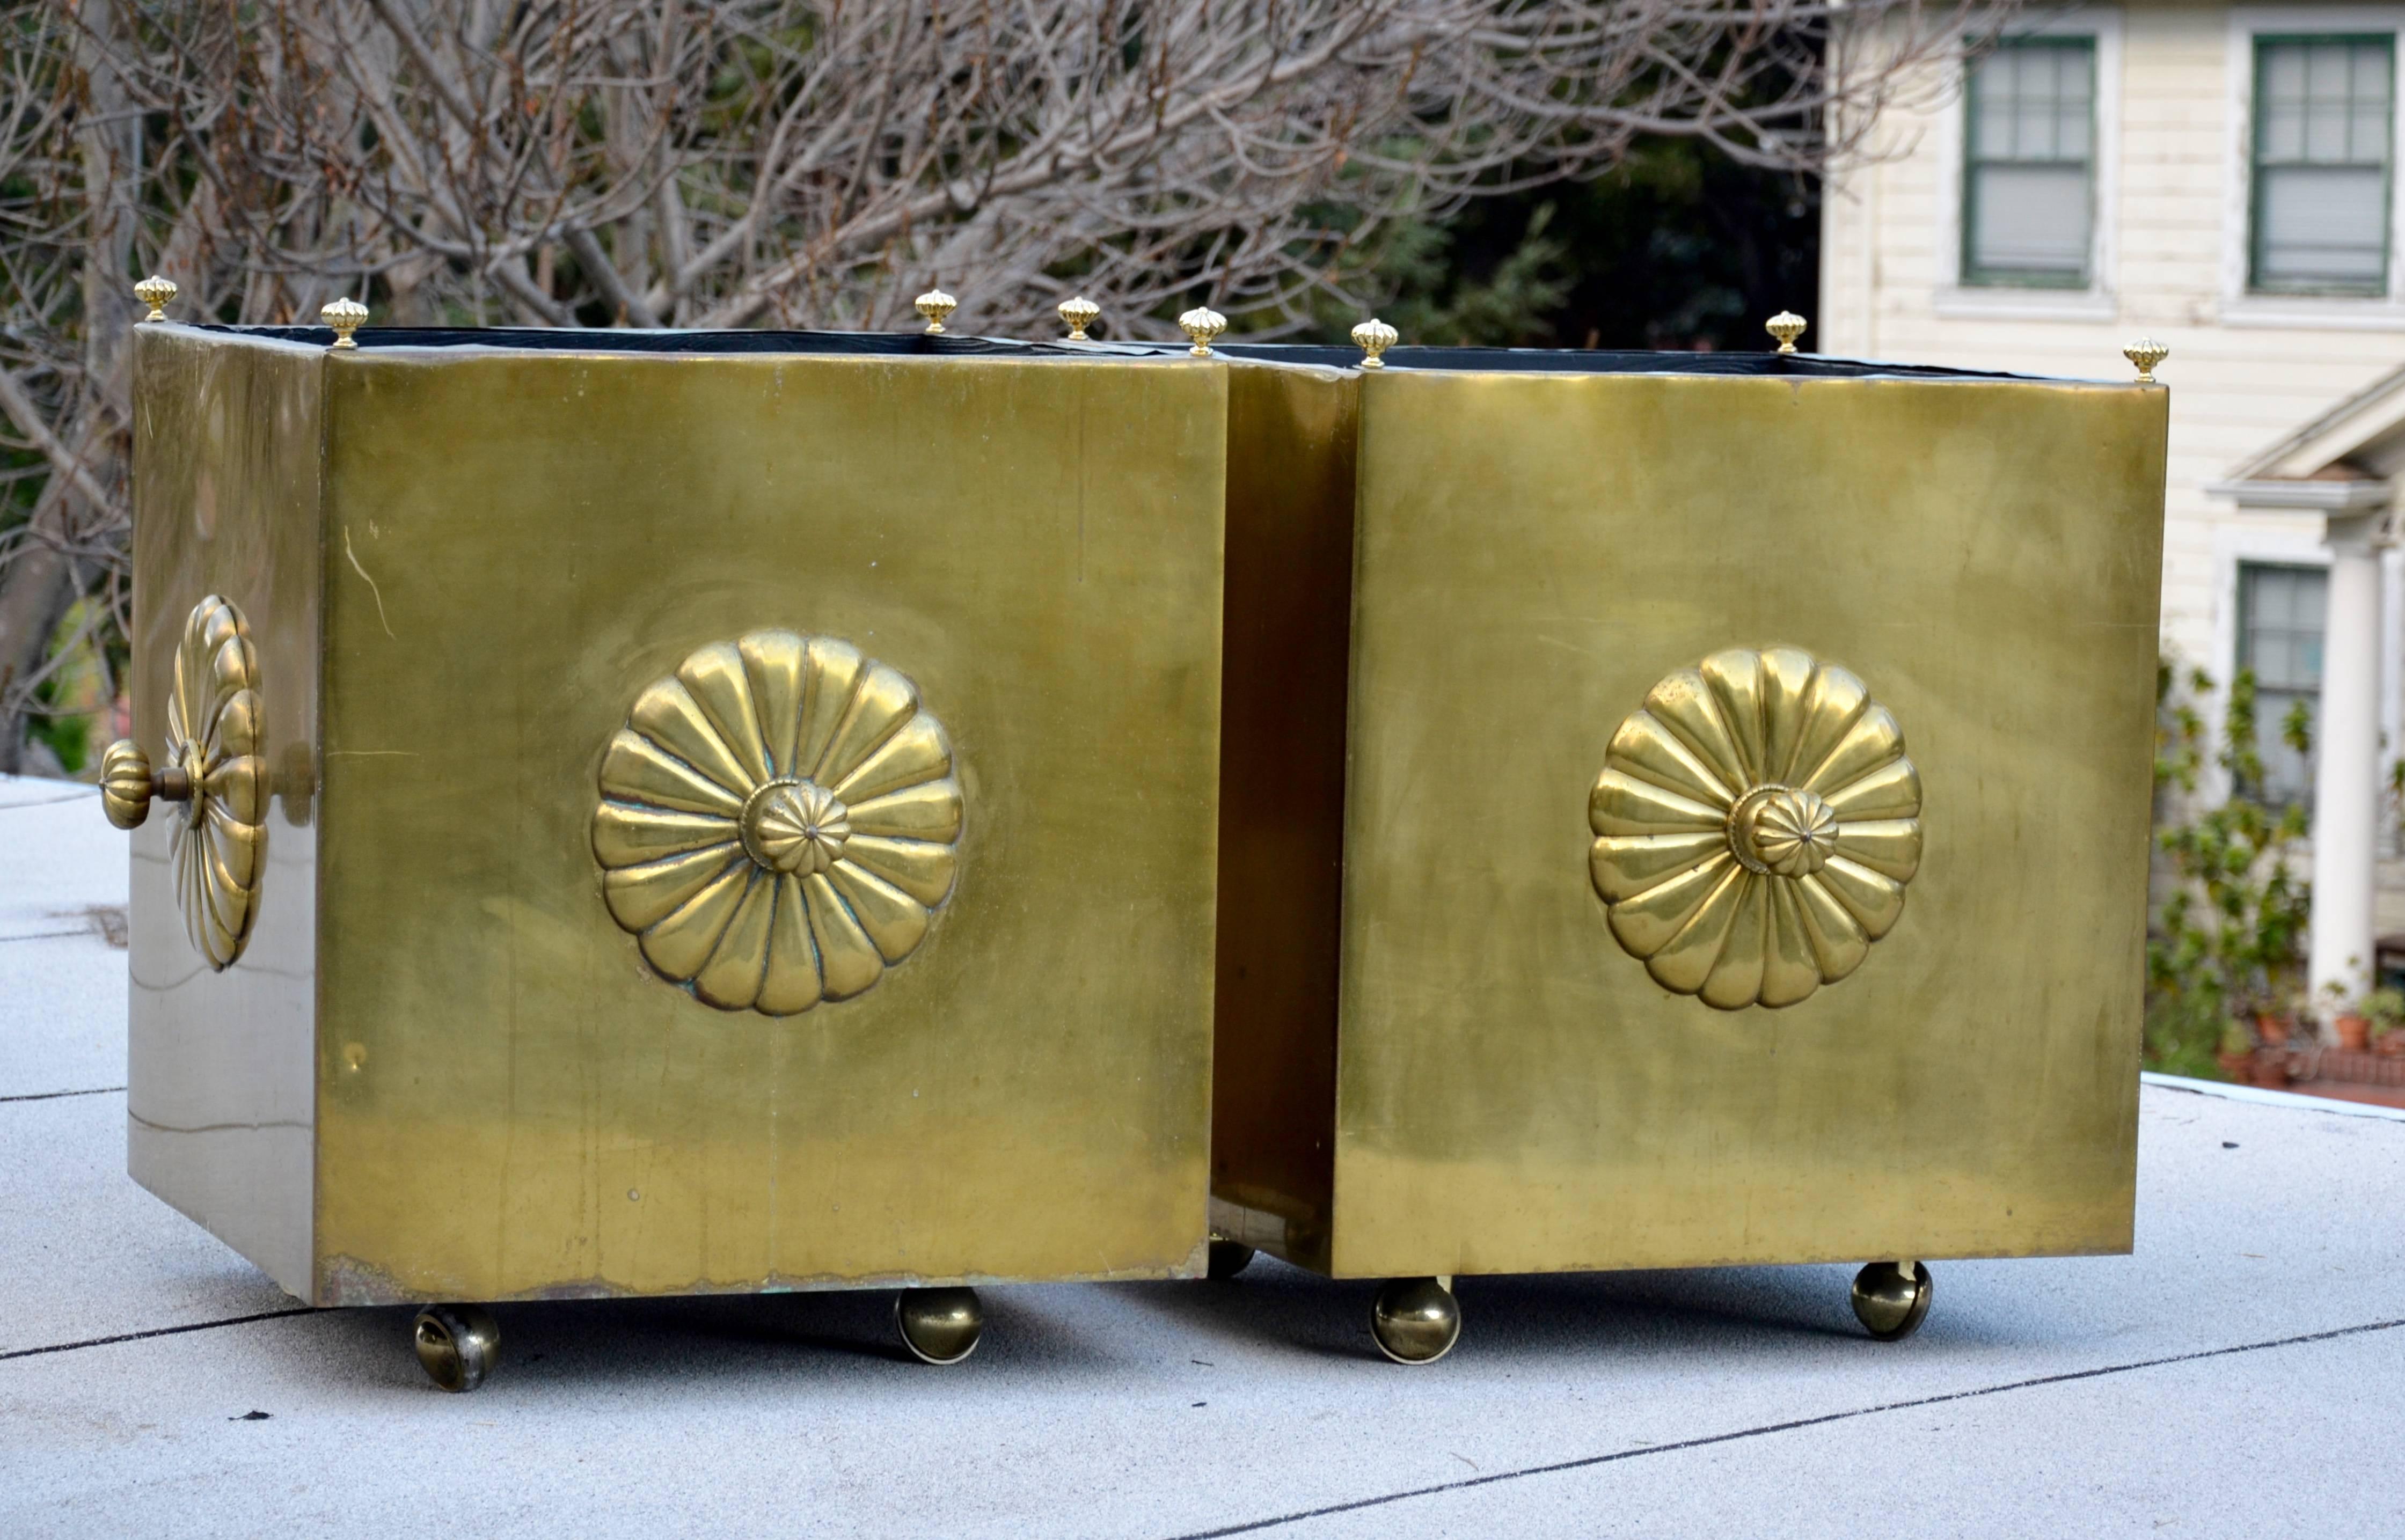 These fabulously decorative pair of brass planters are comprised of solid heavy gauge brass, veneered to sturdy wood box frames. Nicely detailed with scalloped medallions and brass finials. Casters were added for easy transport. We can polish them